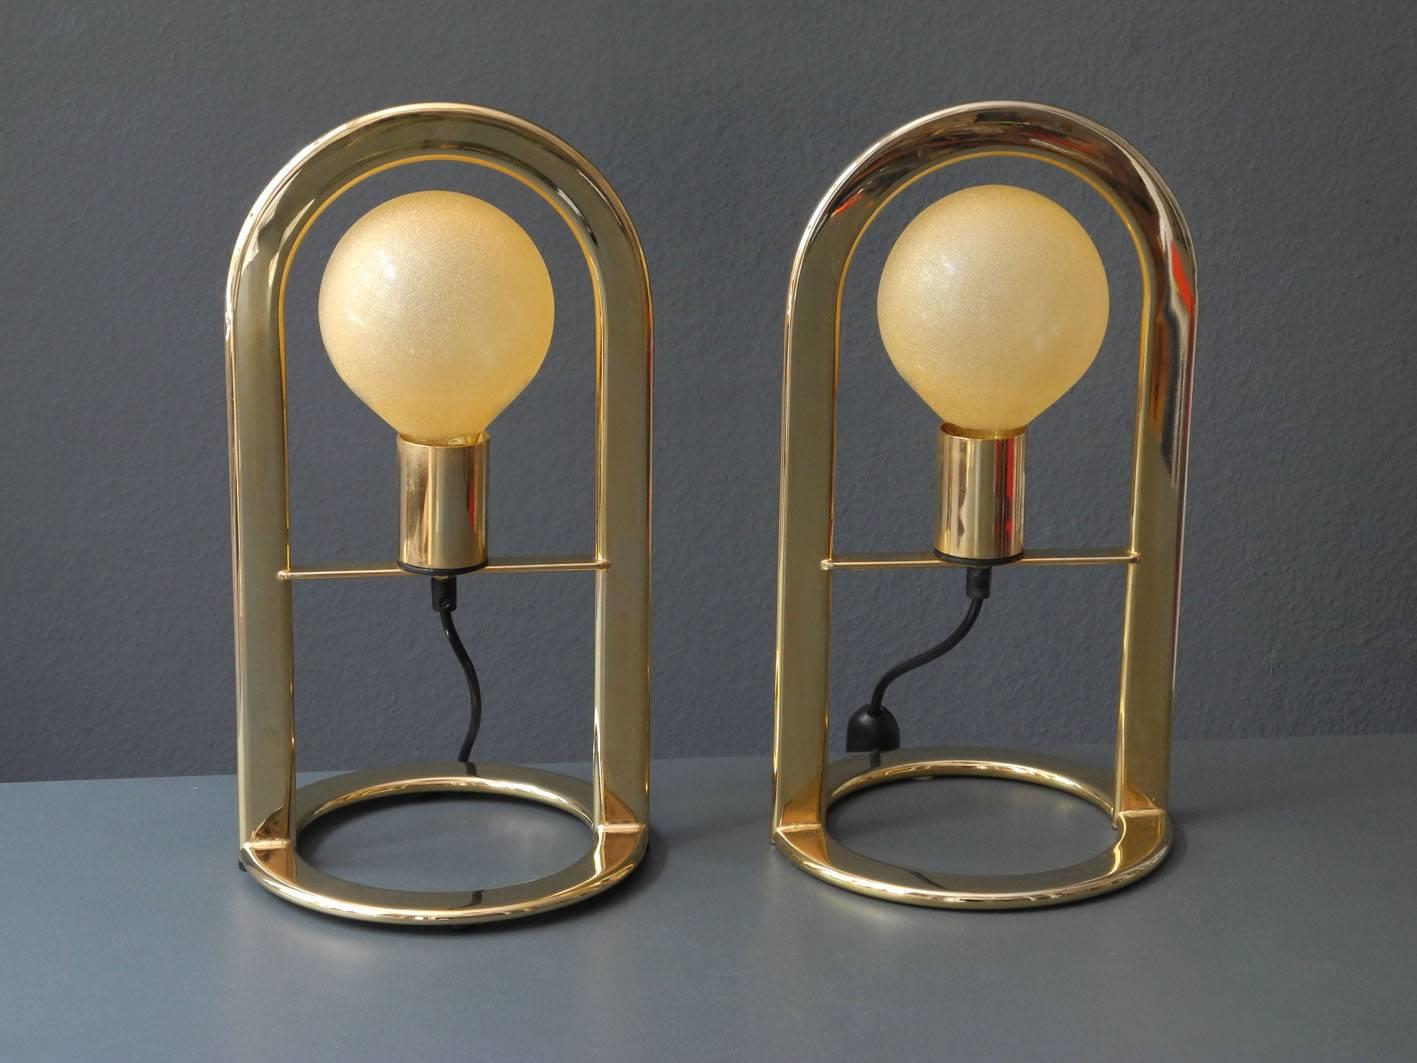 Pair of large golden Postmodern 1980s metal table lamps. Very elegant minimalistic design. High quality. Very good vintage condition without damages. Depending to the bulb color and size the appearance changes of the lamps.
One E27 socket up to